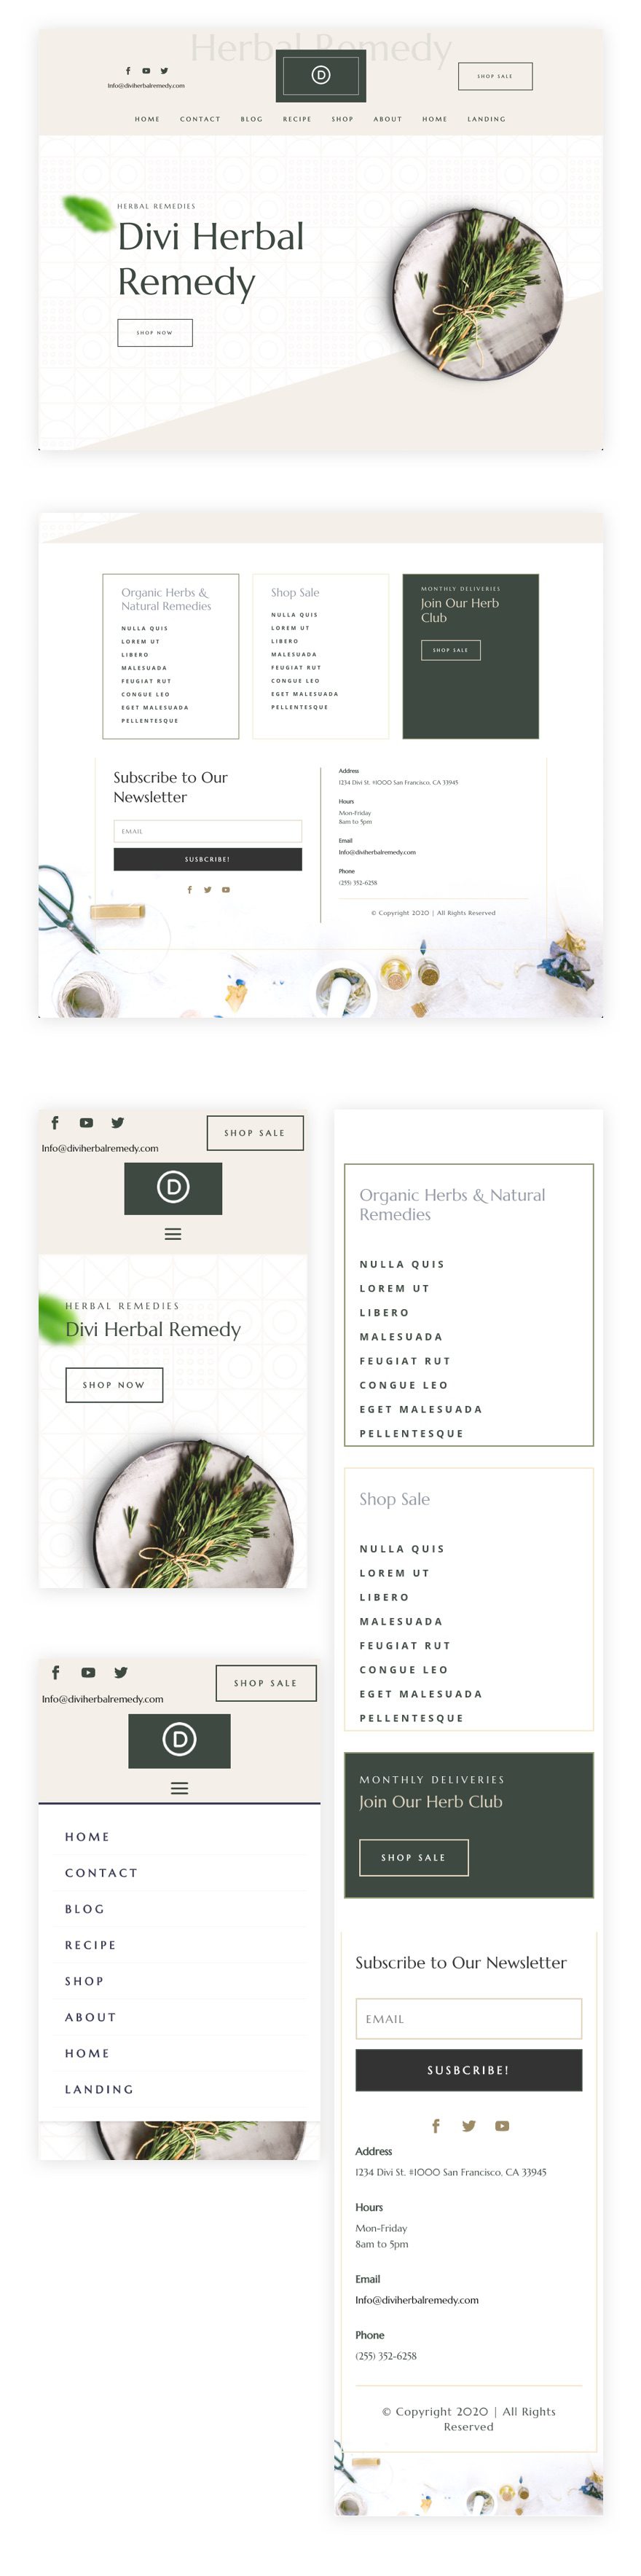 divi herbal rememdy header and footer template